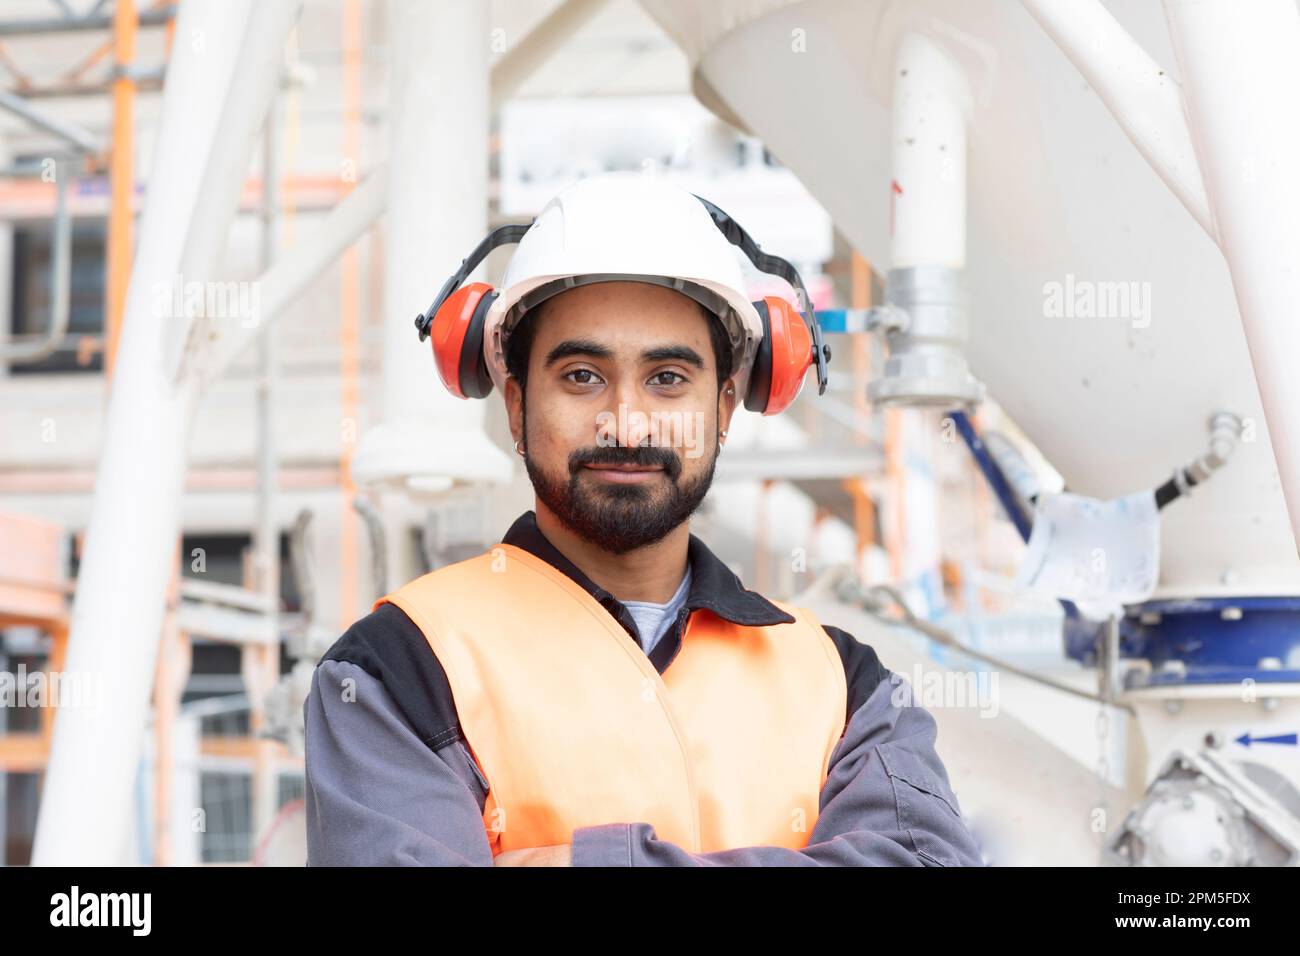 young technician safety vest and helmet working Stock Photo